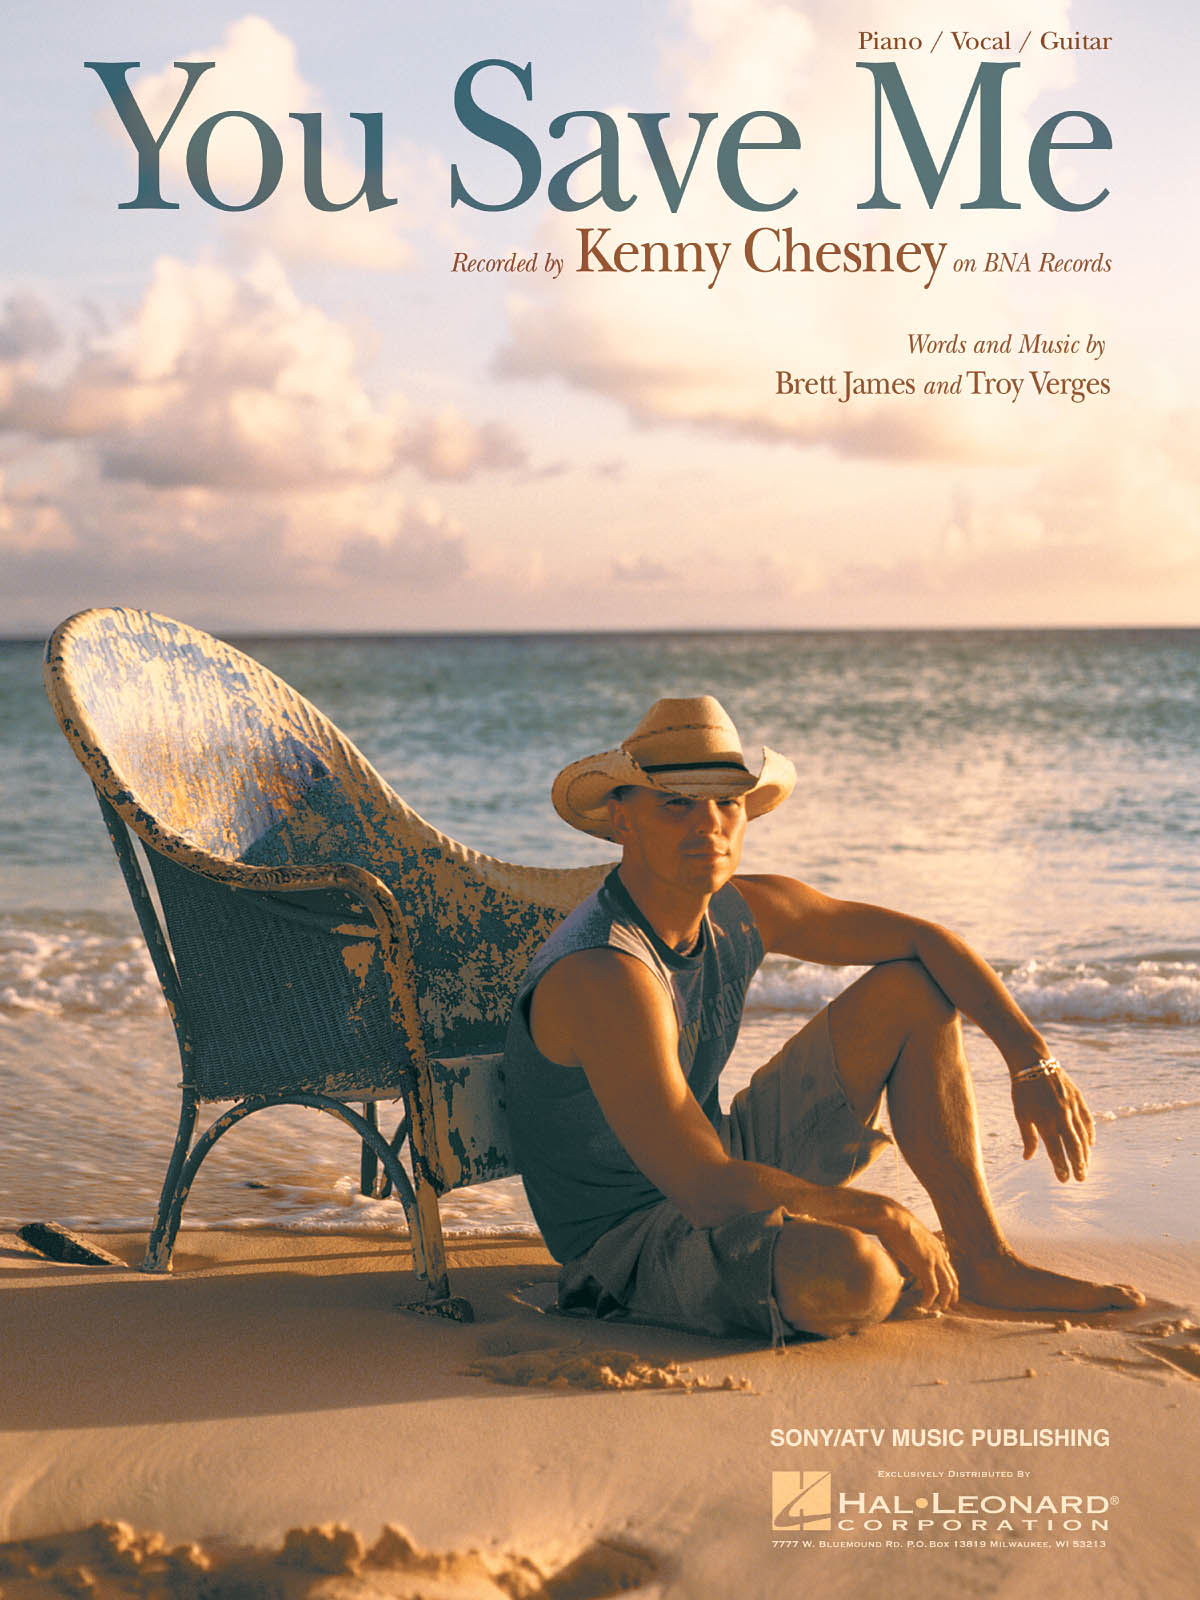 Kenny Chesney: You Save Me: Vocal and Piano: Single Sheet